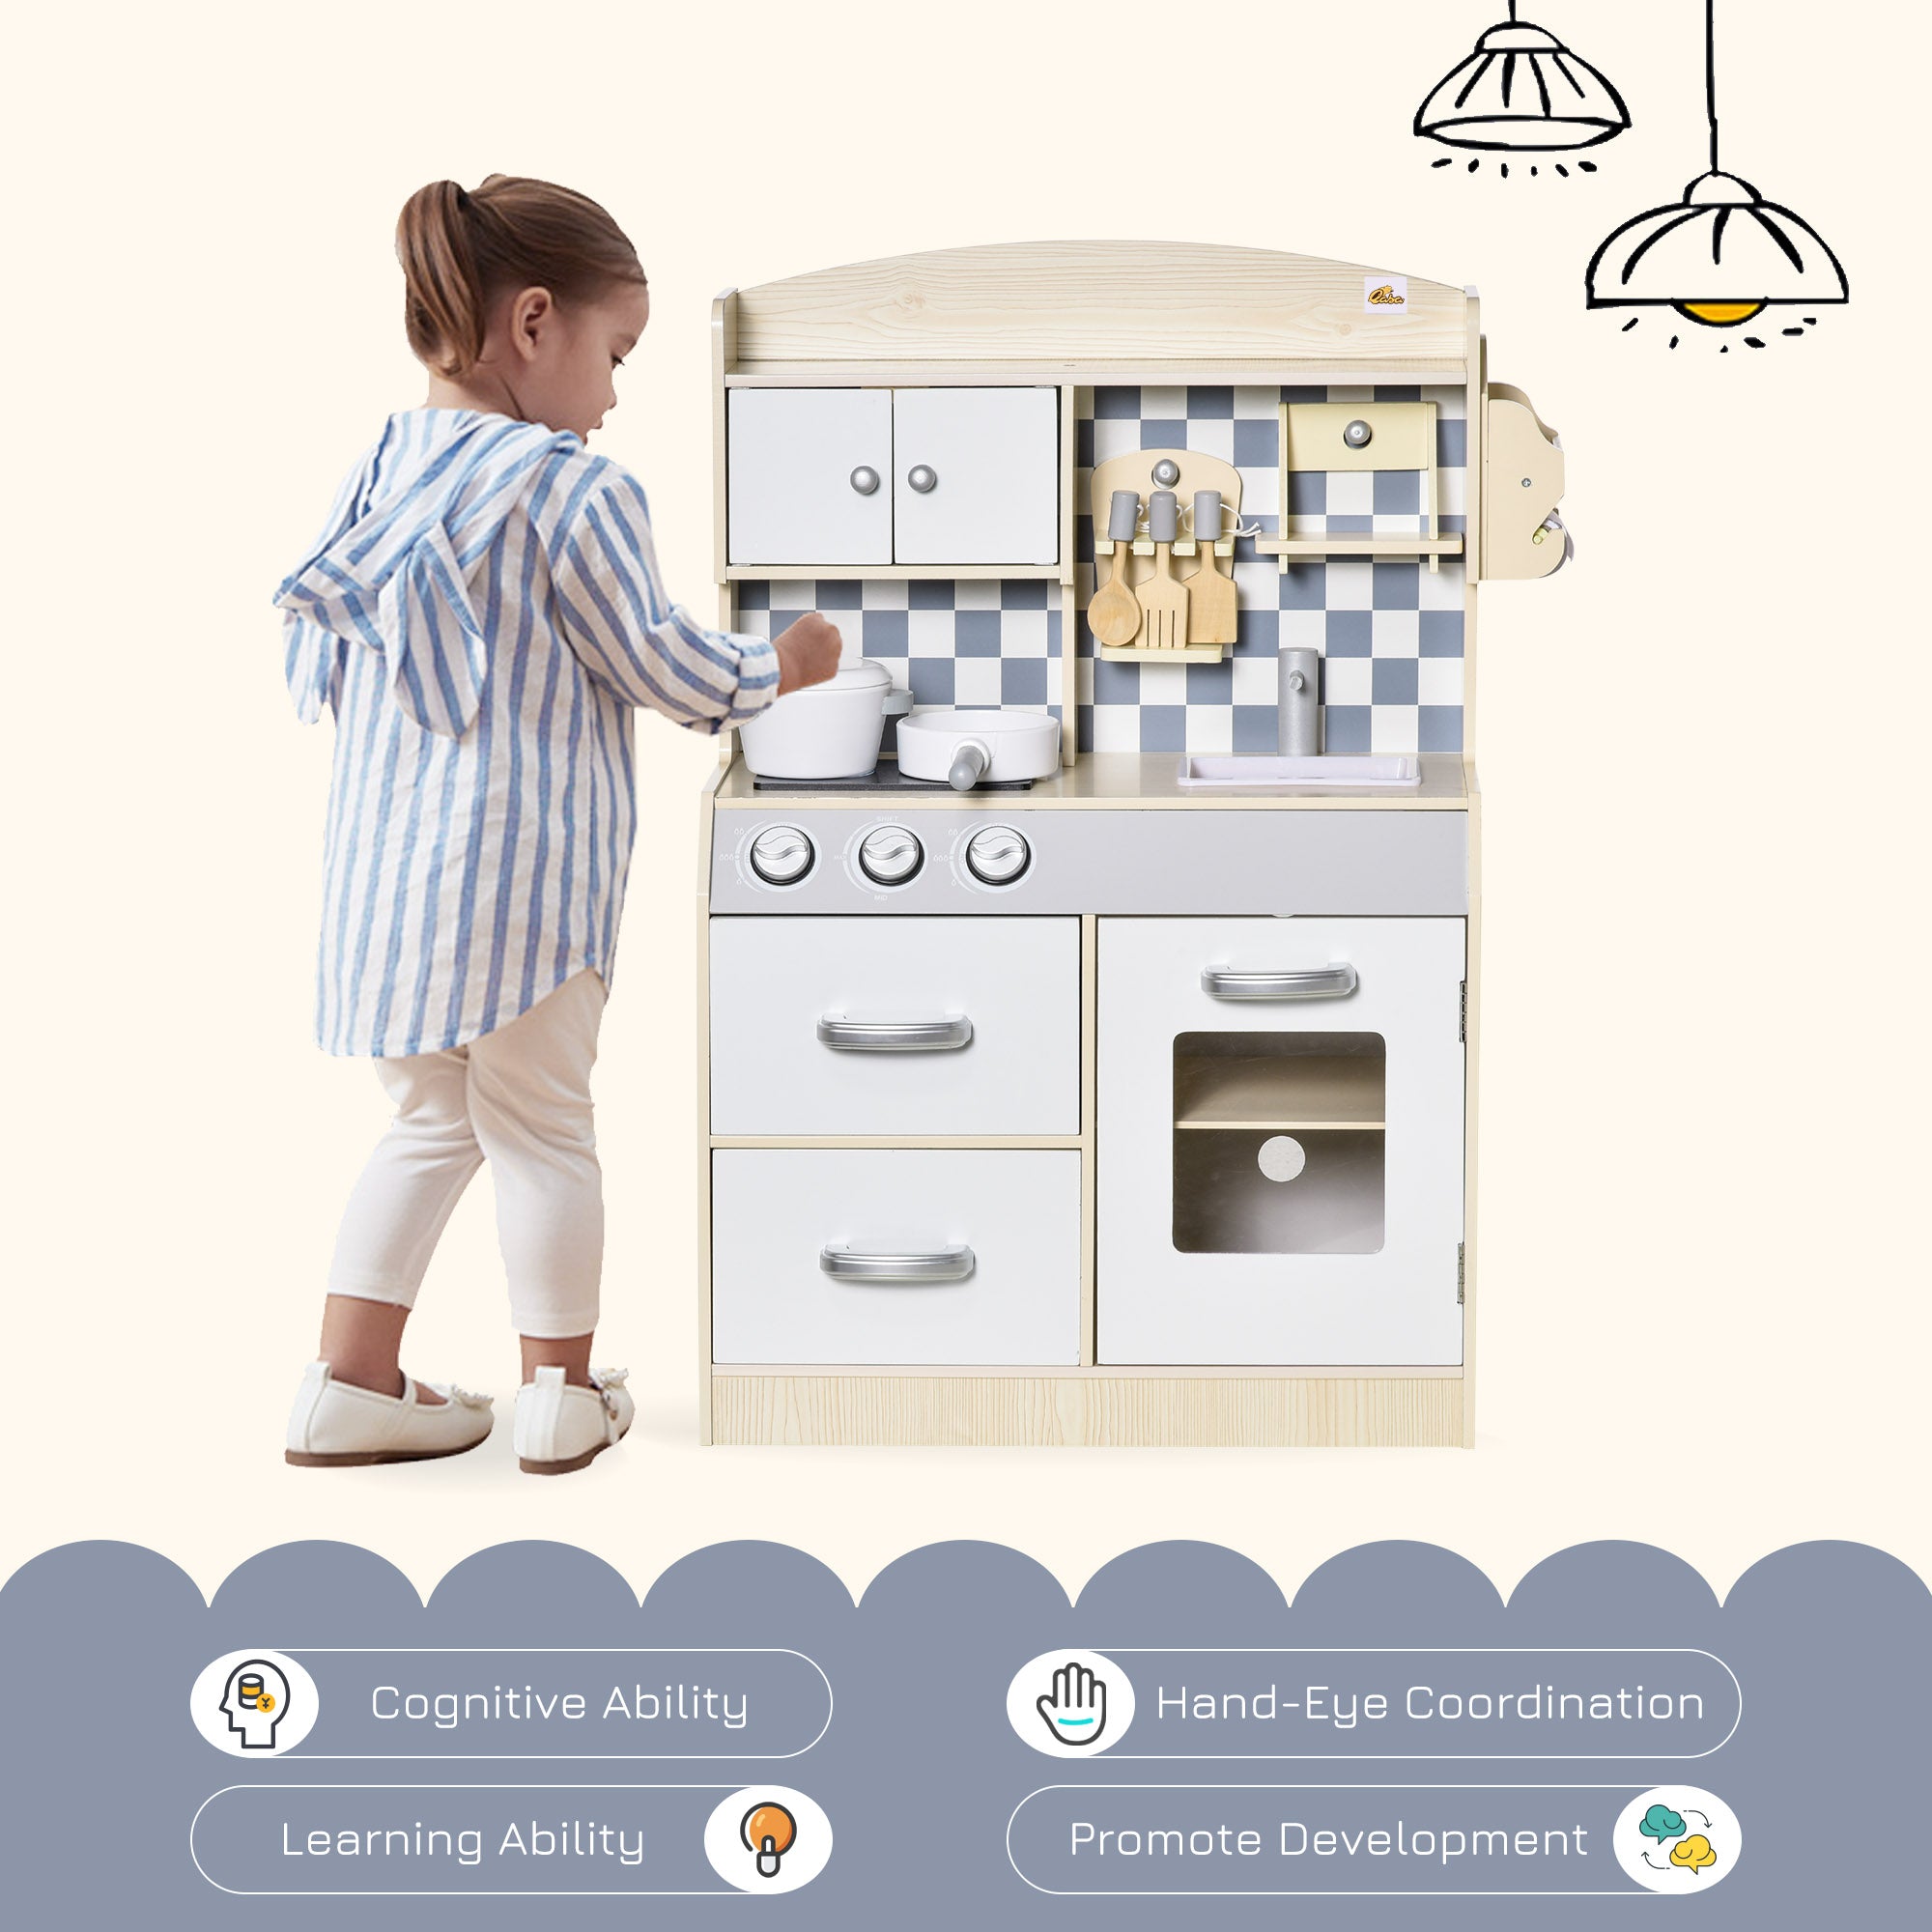 Halifax North America Wooden Play Kitchen with Lights | Mathis Home